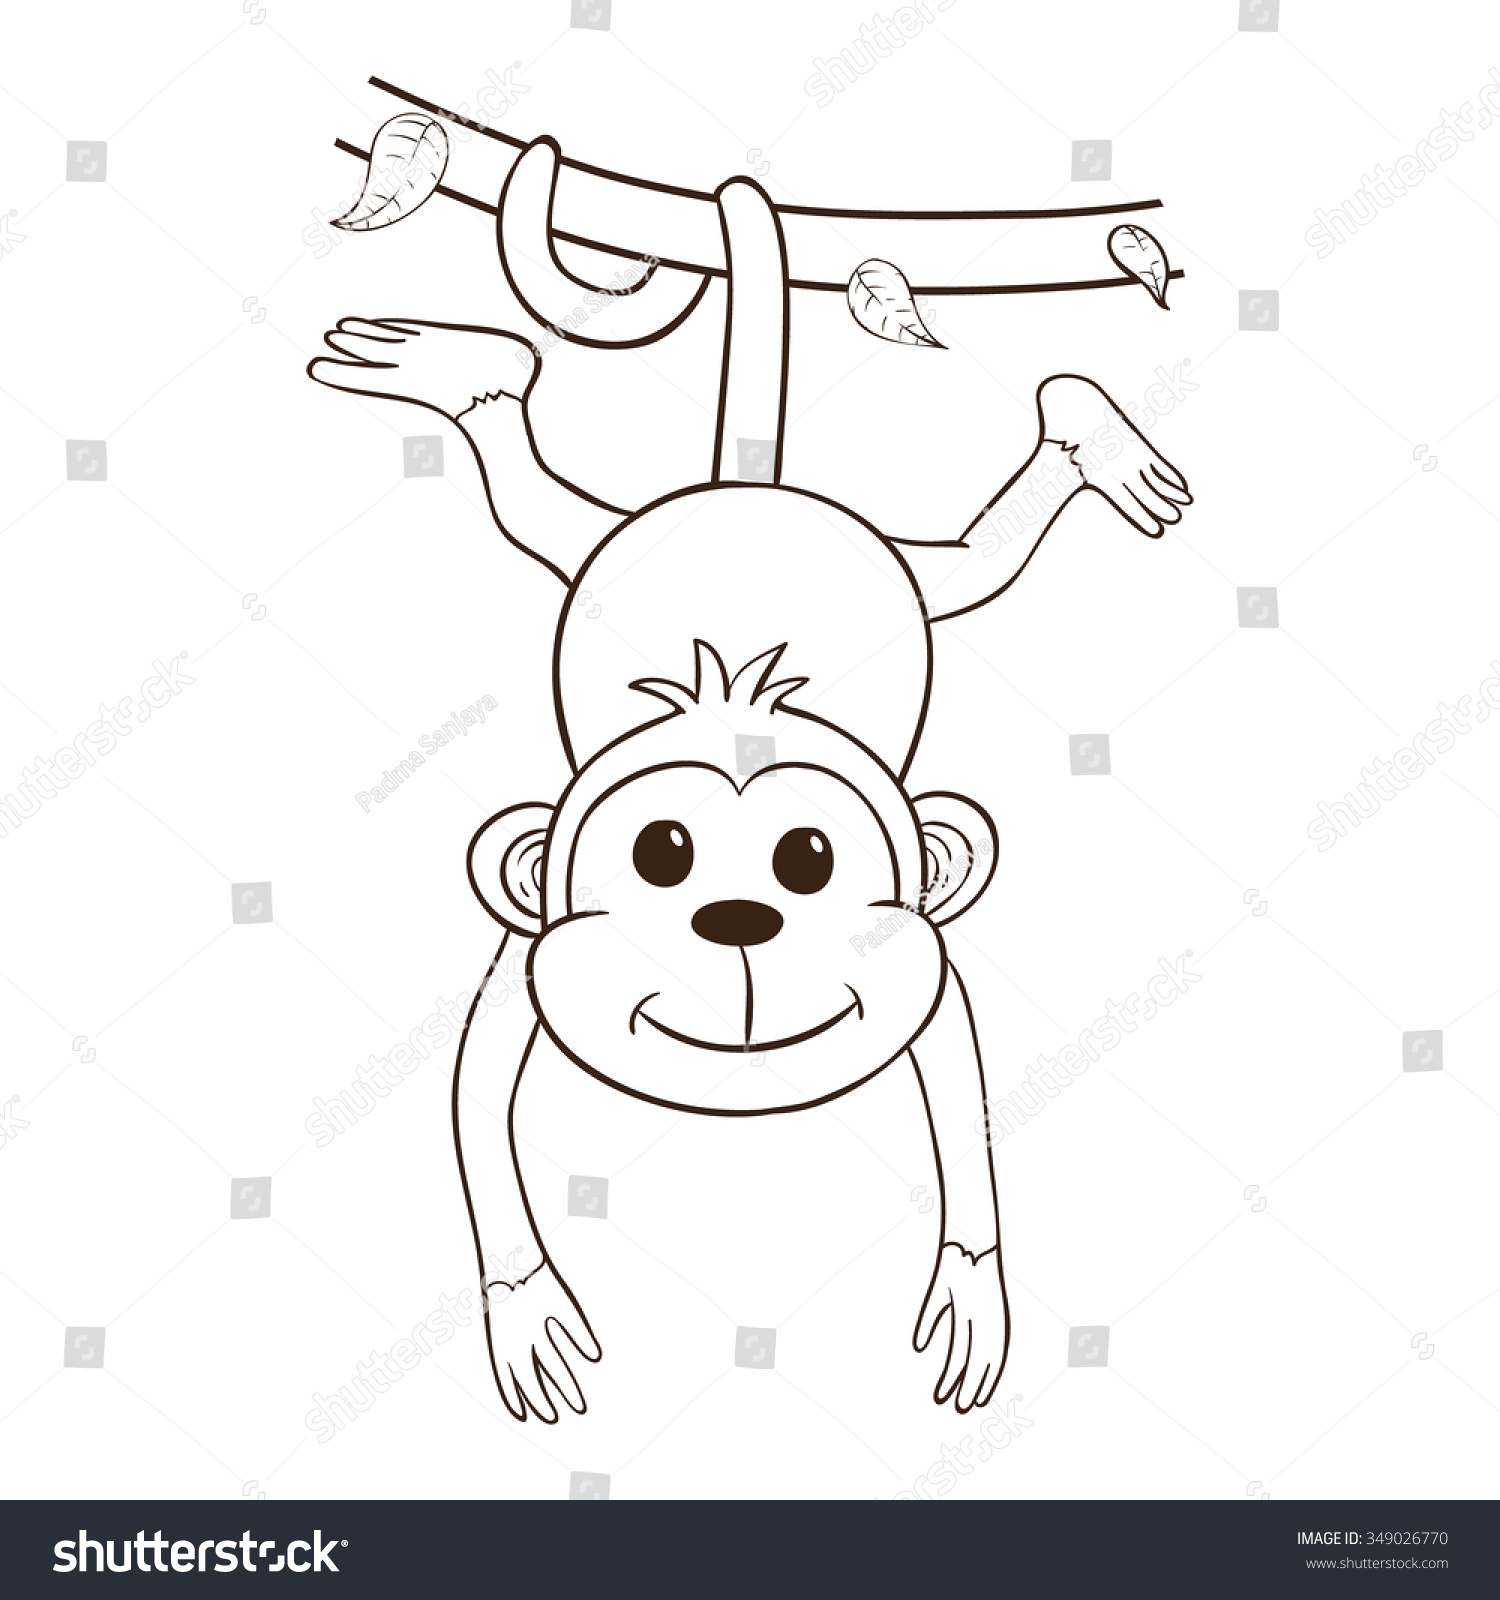 All 102+ Images how to draw a monkey hanging from a vine Latest